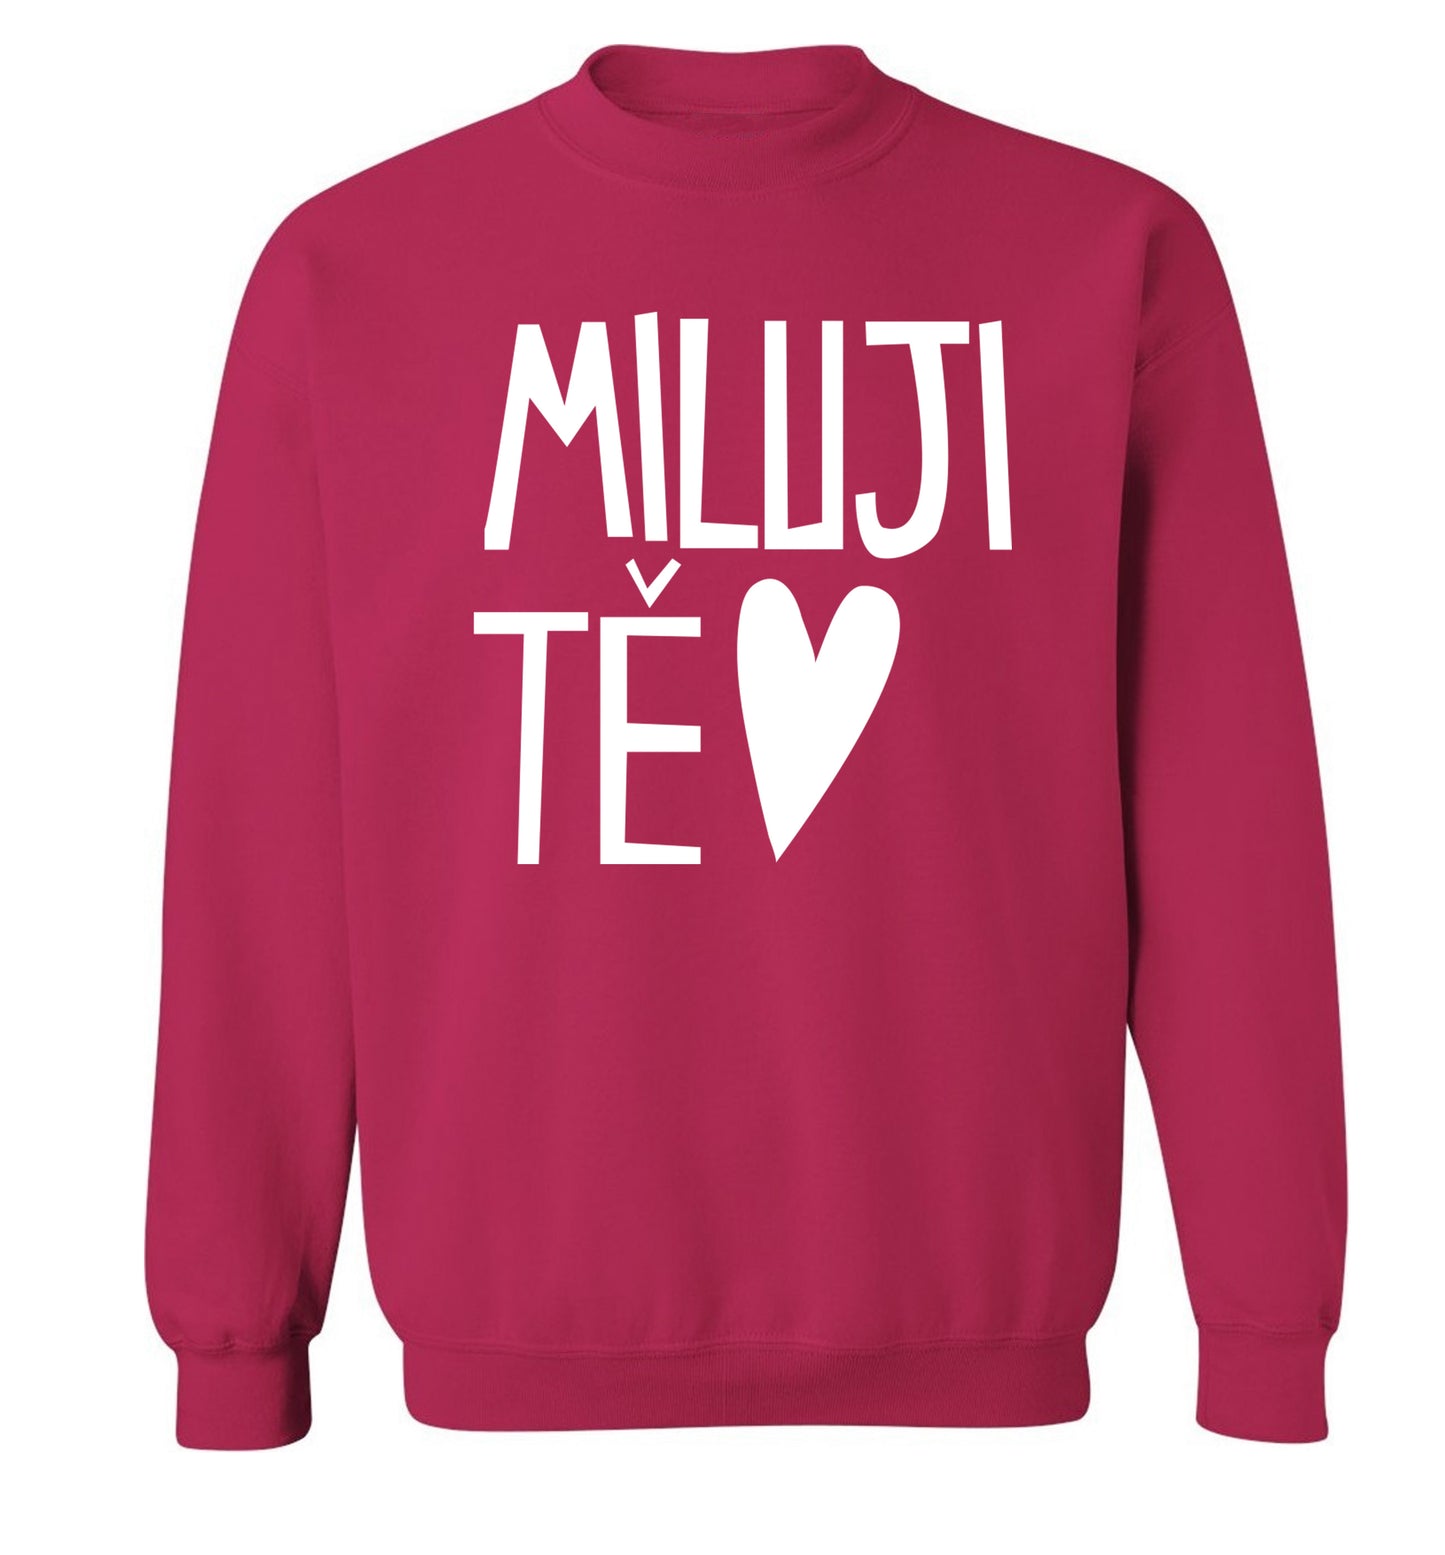 Miluji T_ - I love you Adult's unisex pink Sweater 2XL